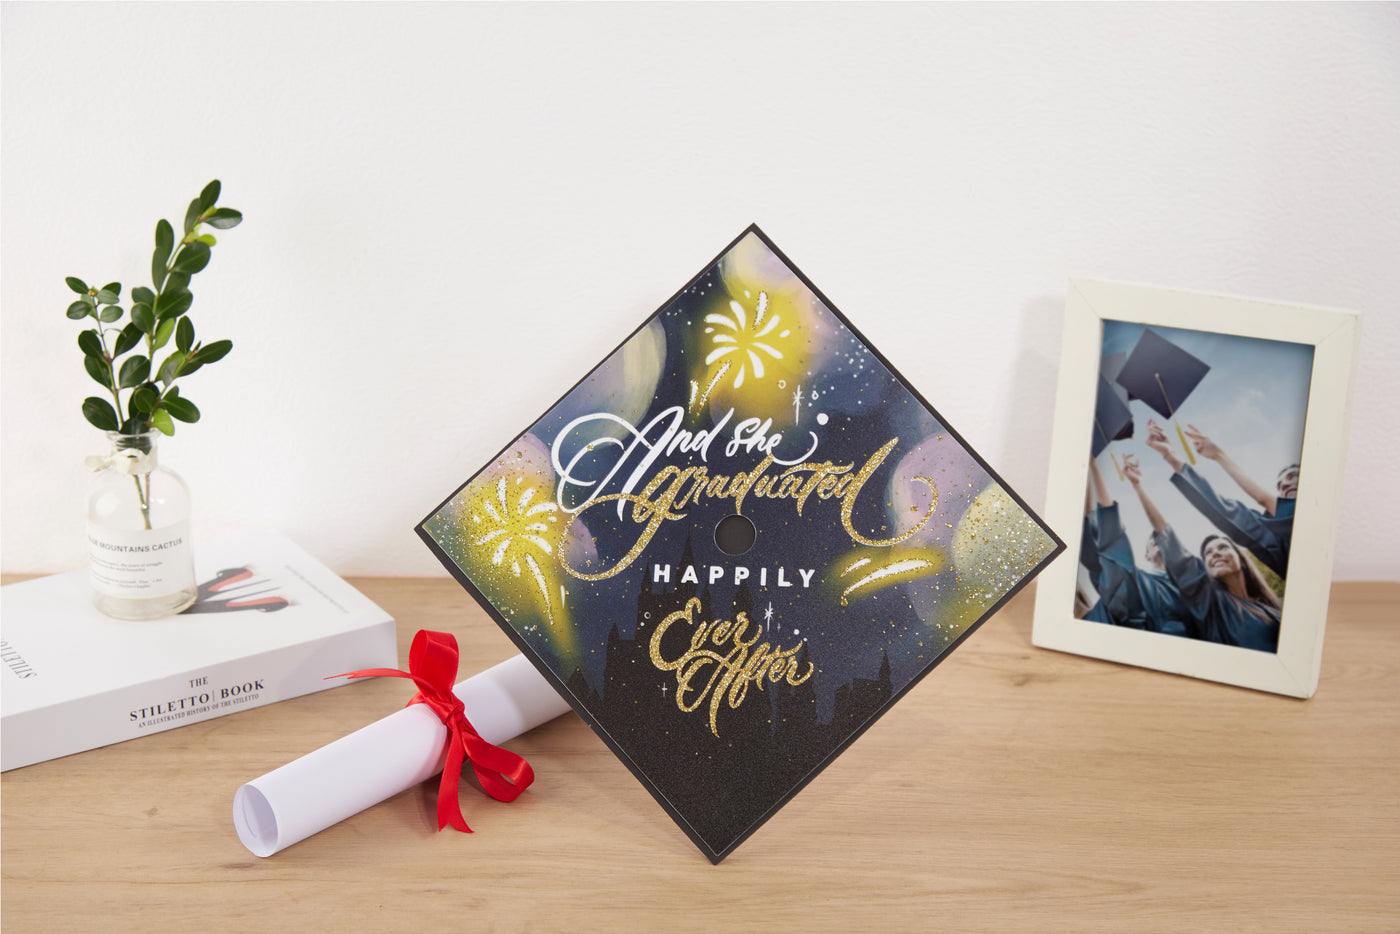 Graduation cap topper art print, And she graduated happily ever after